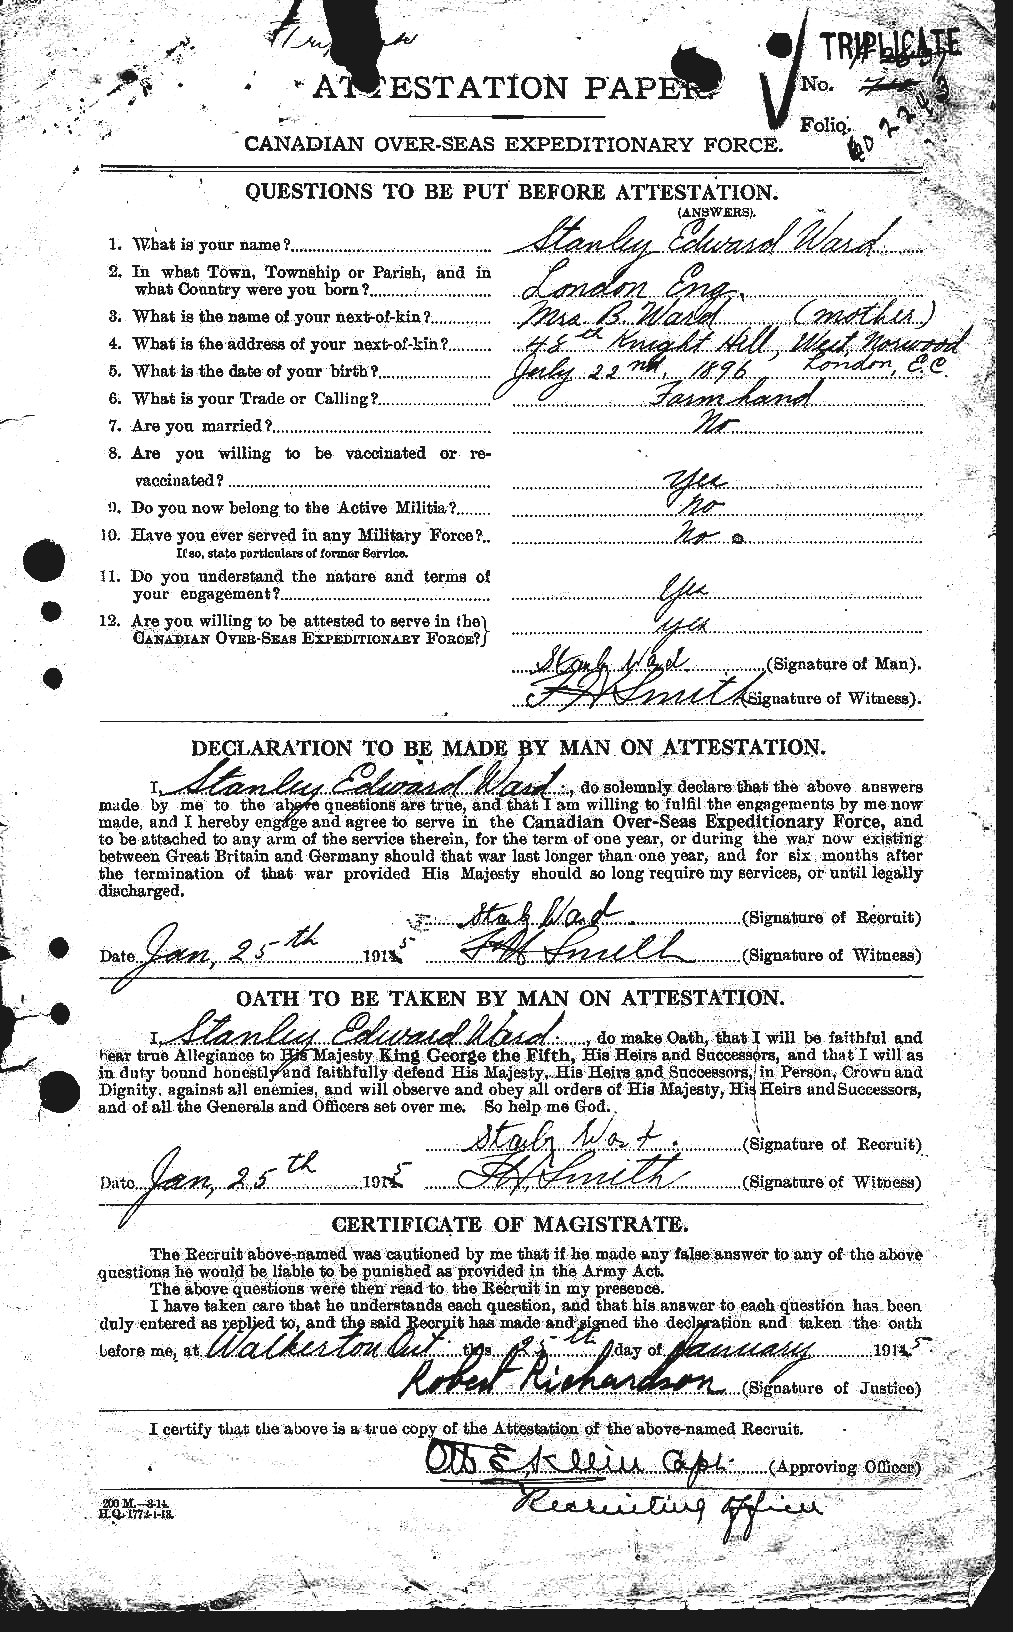 Personnel Records of the First World War - CEF 659694a